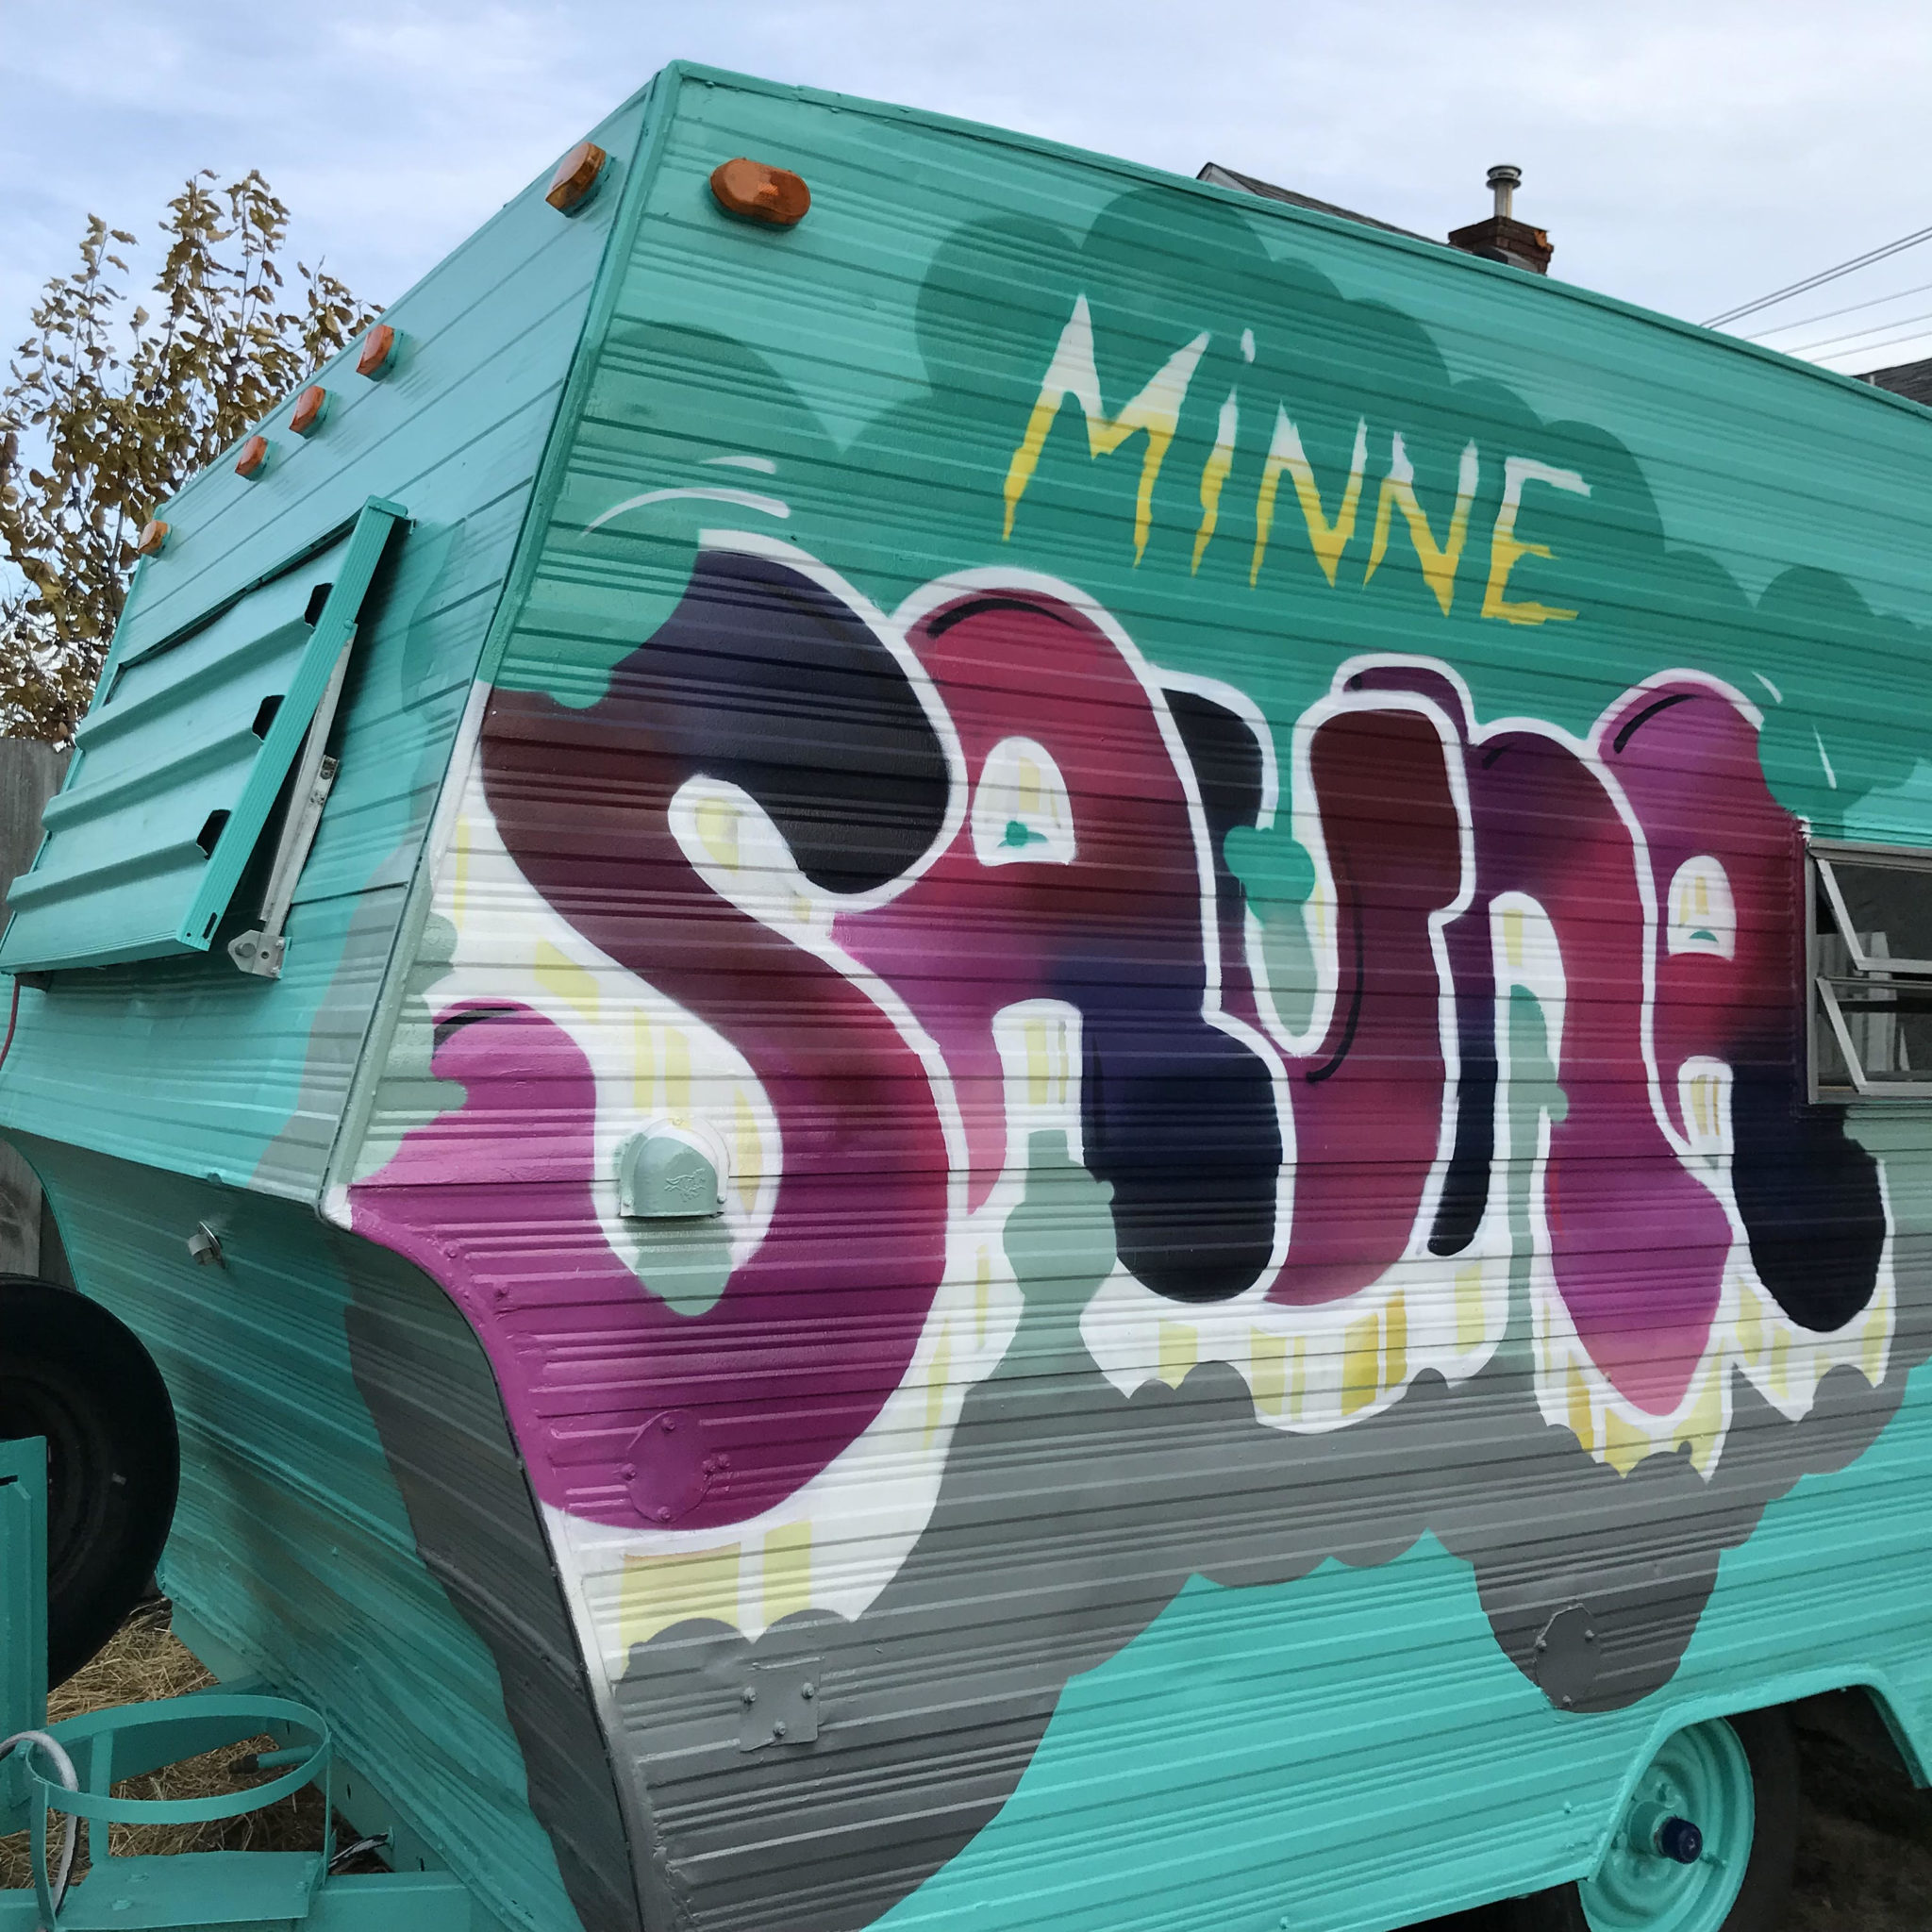 Close up teal camper van labeled "Minne Sauna" in huge bubbly letters painted grapey purple colors.